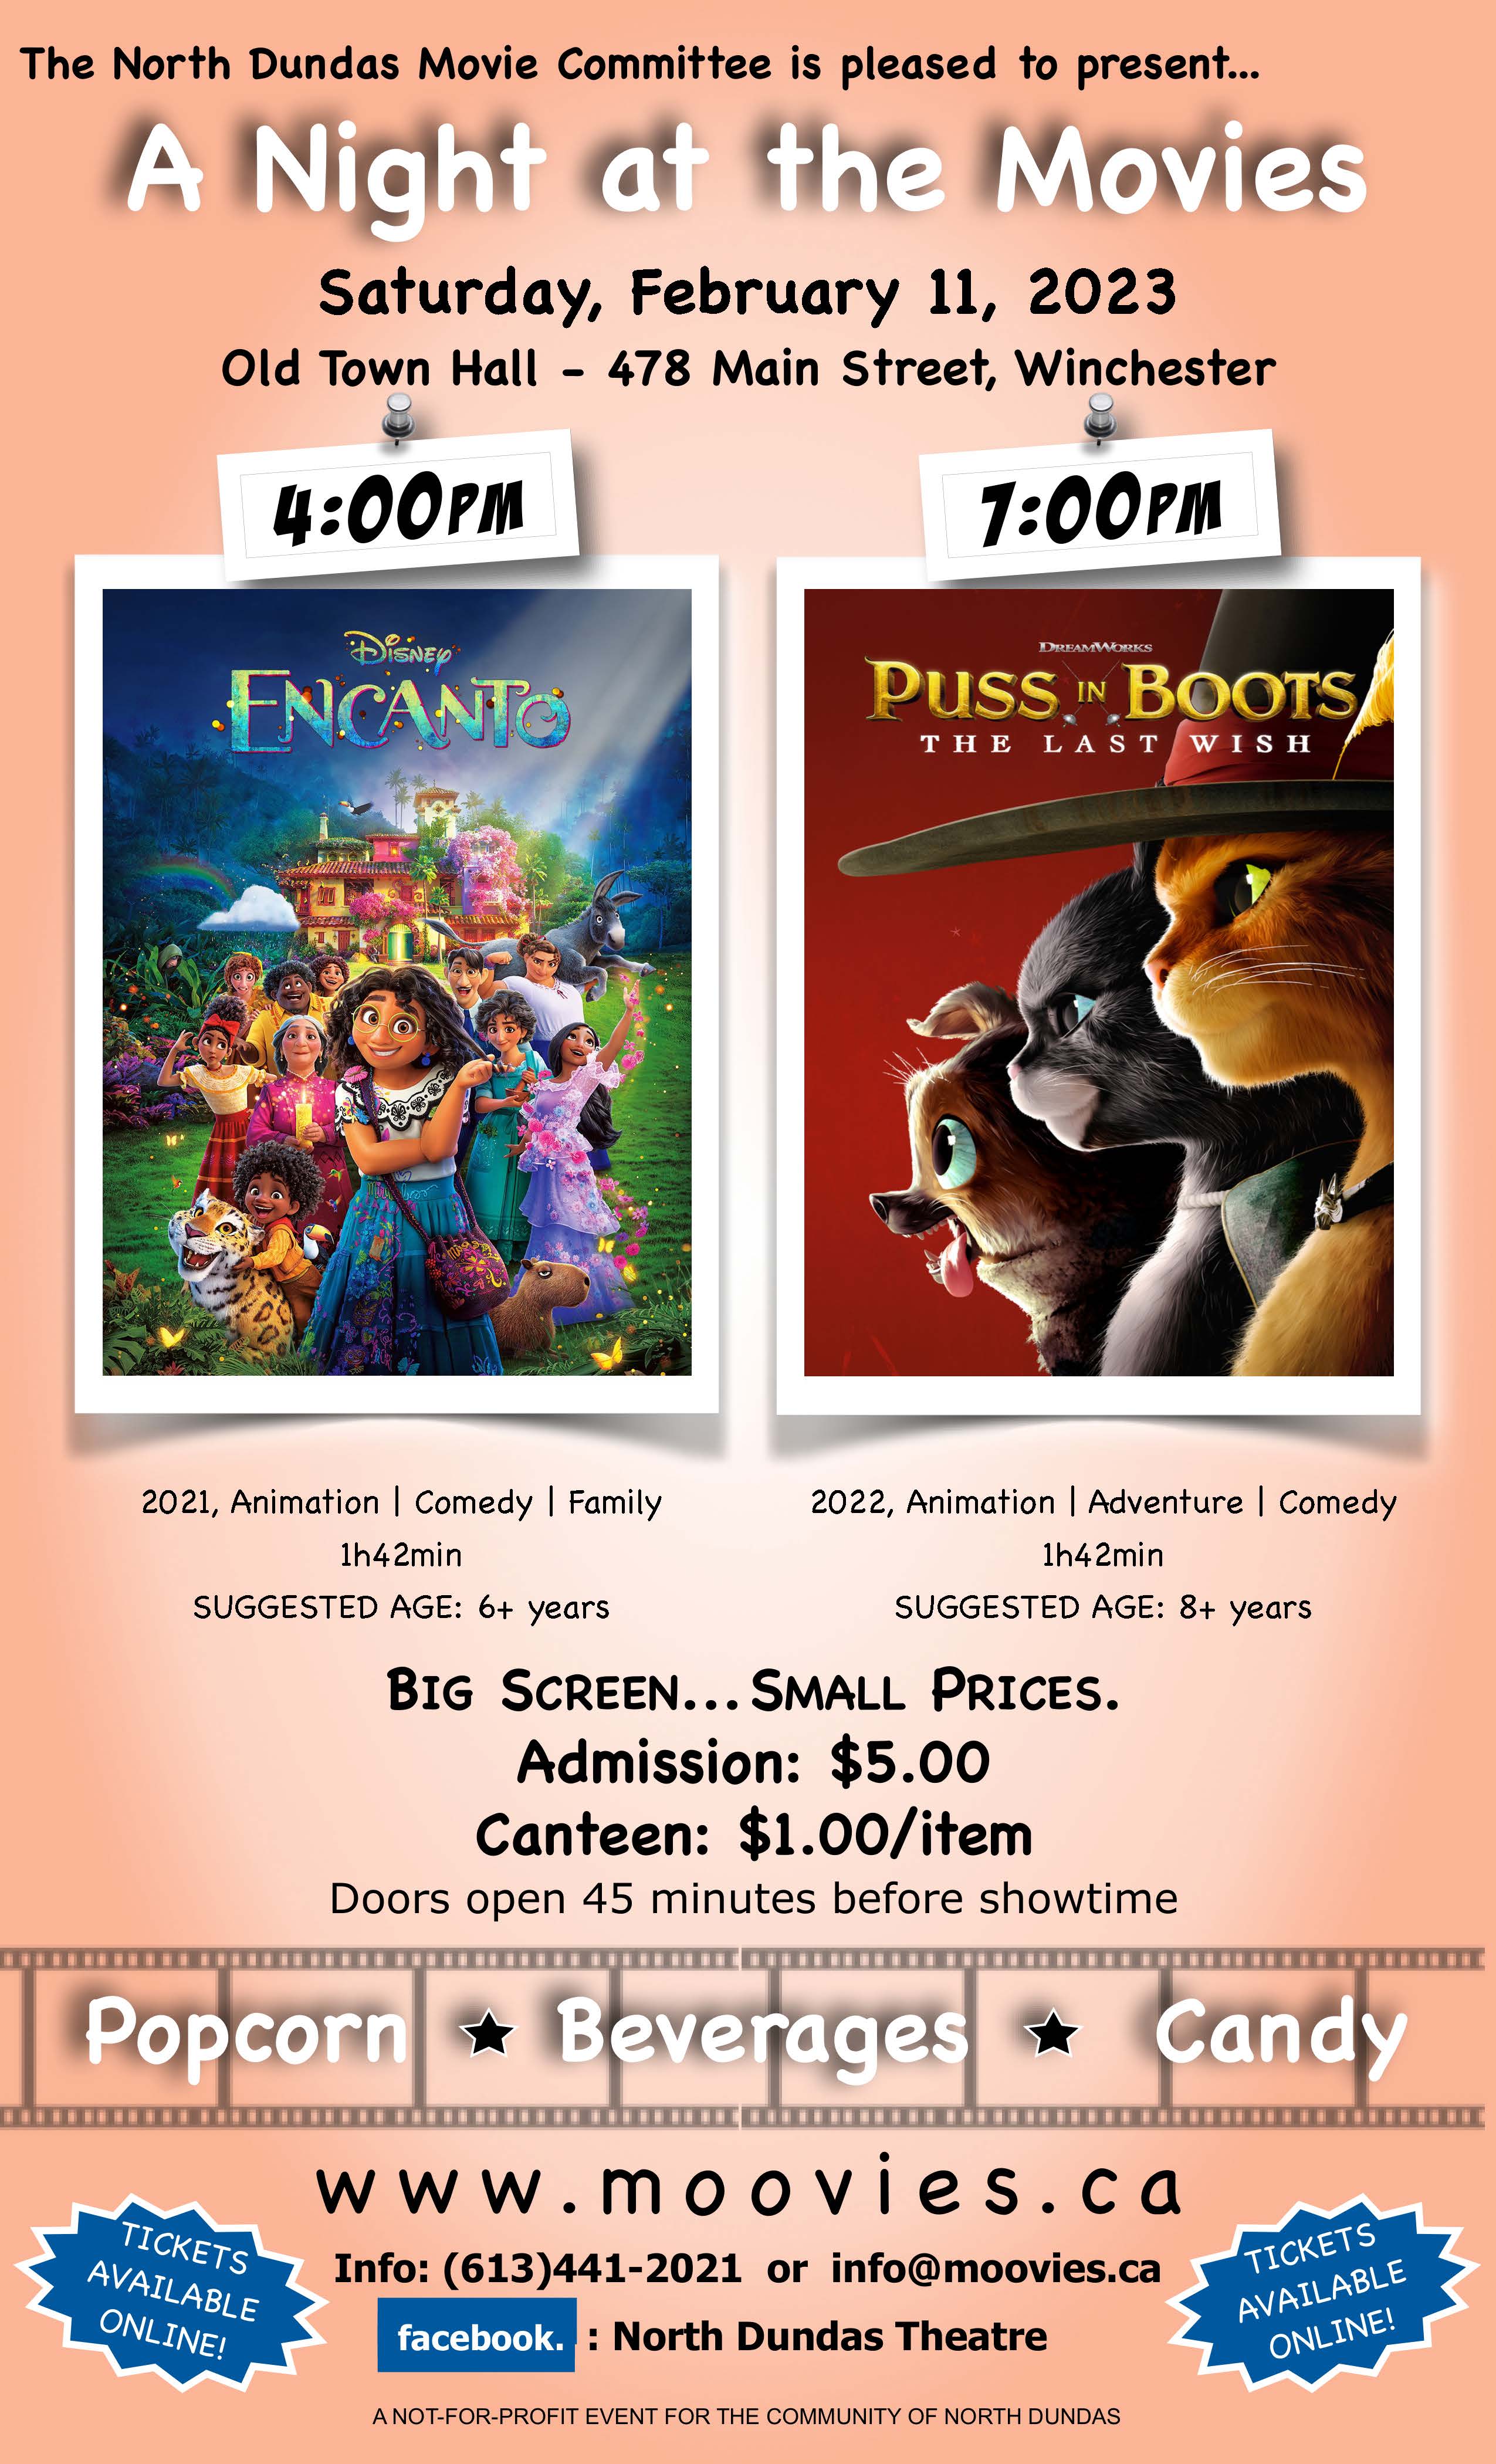 Encanto and Puss in Boots Movie Poster